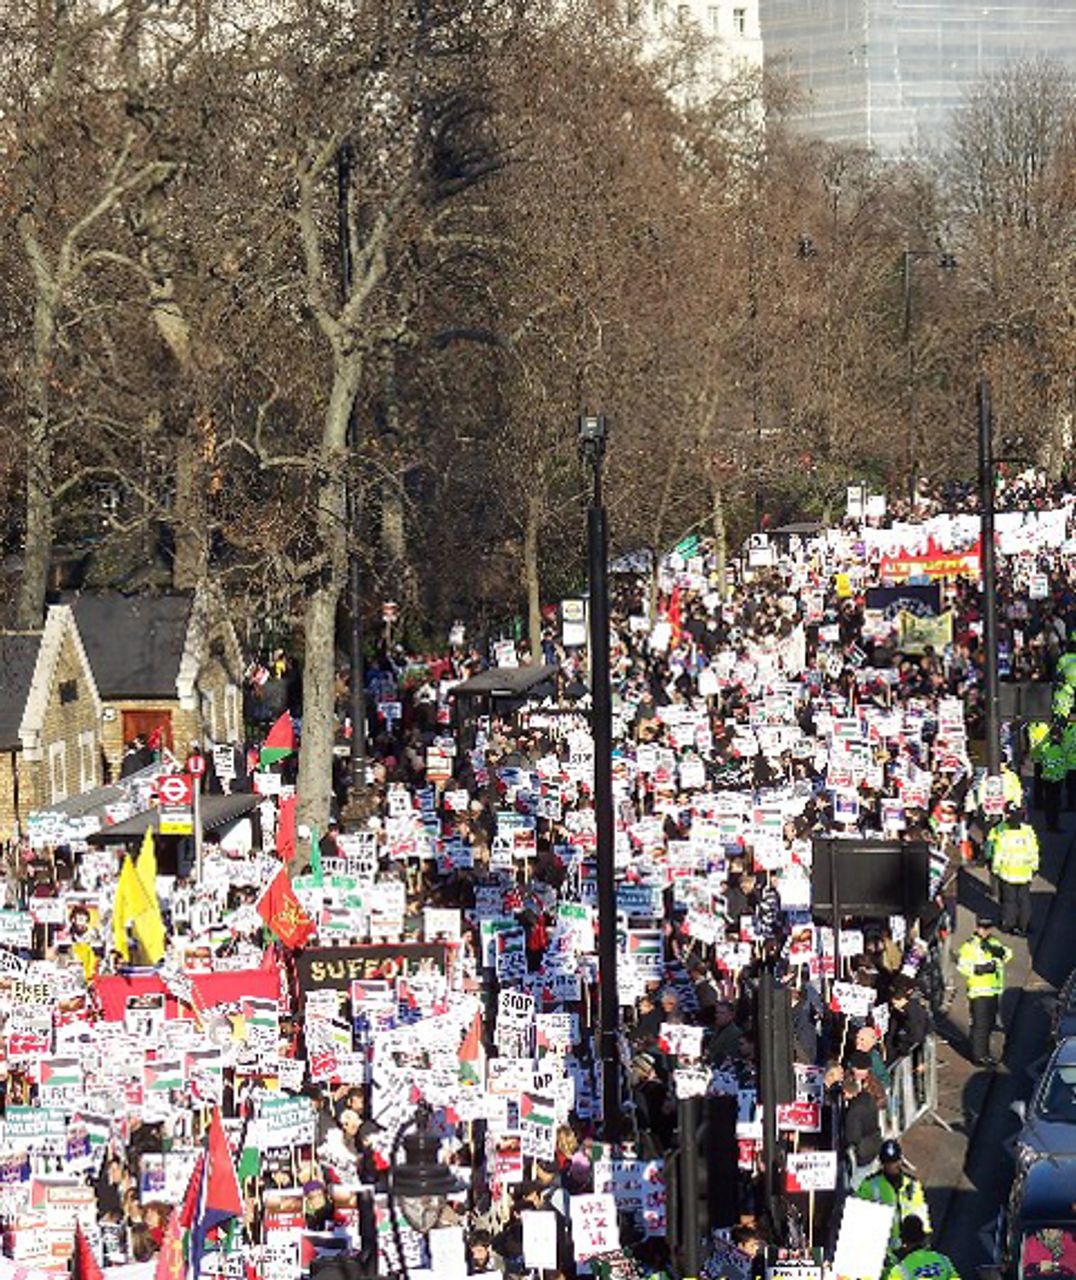 A section of the London protest